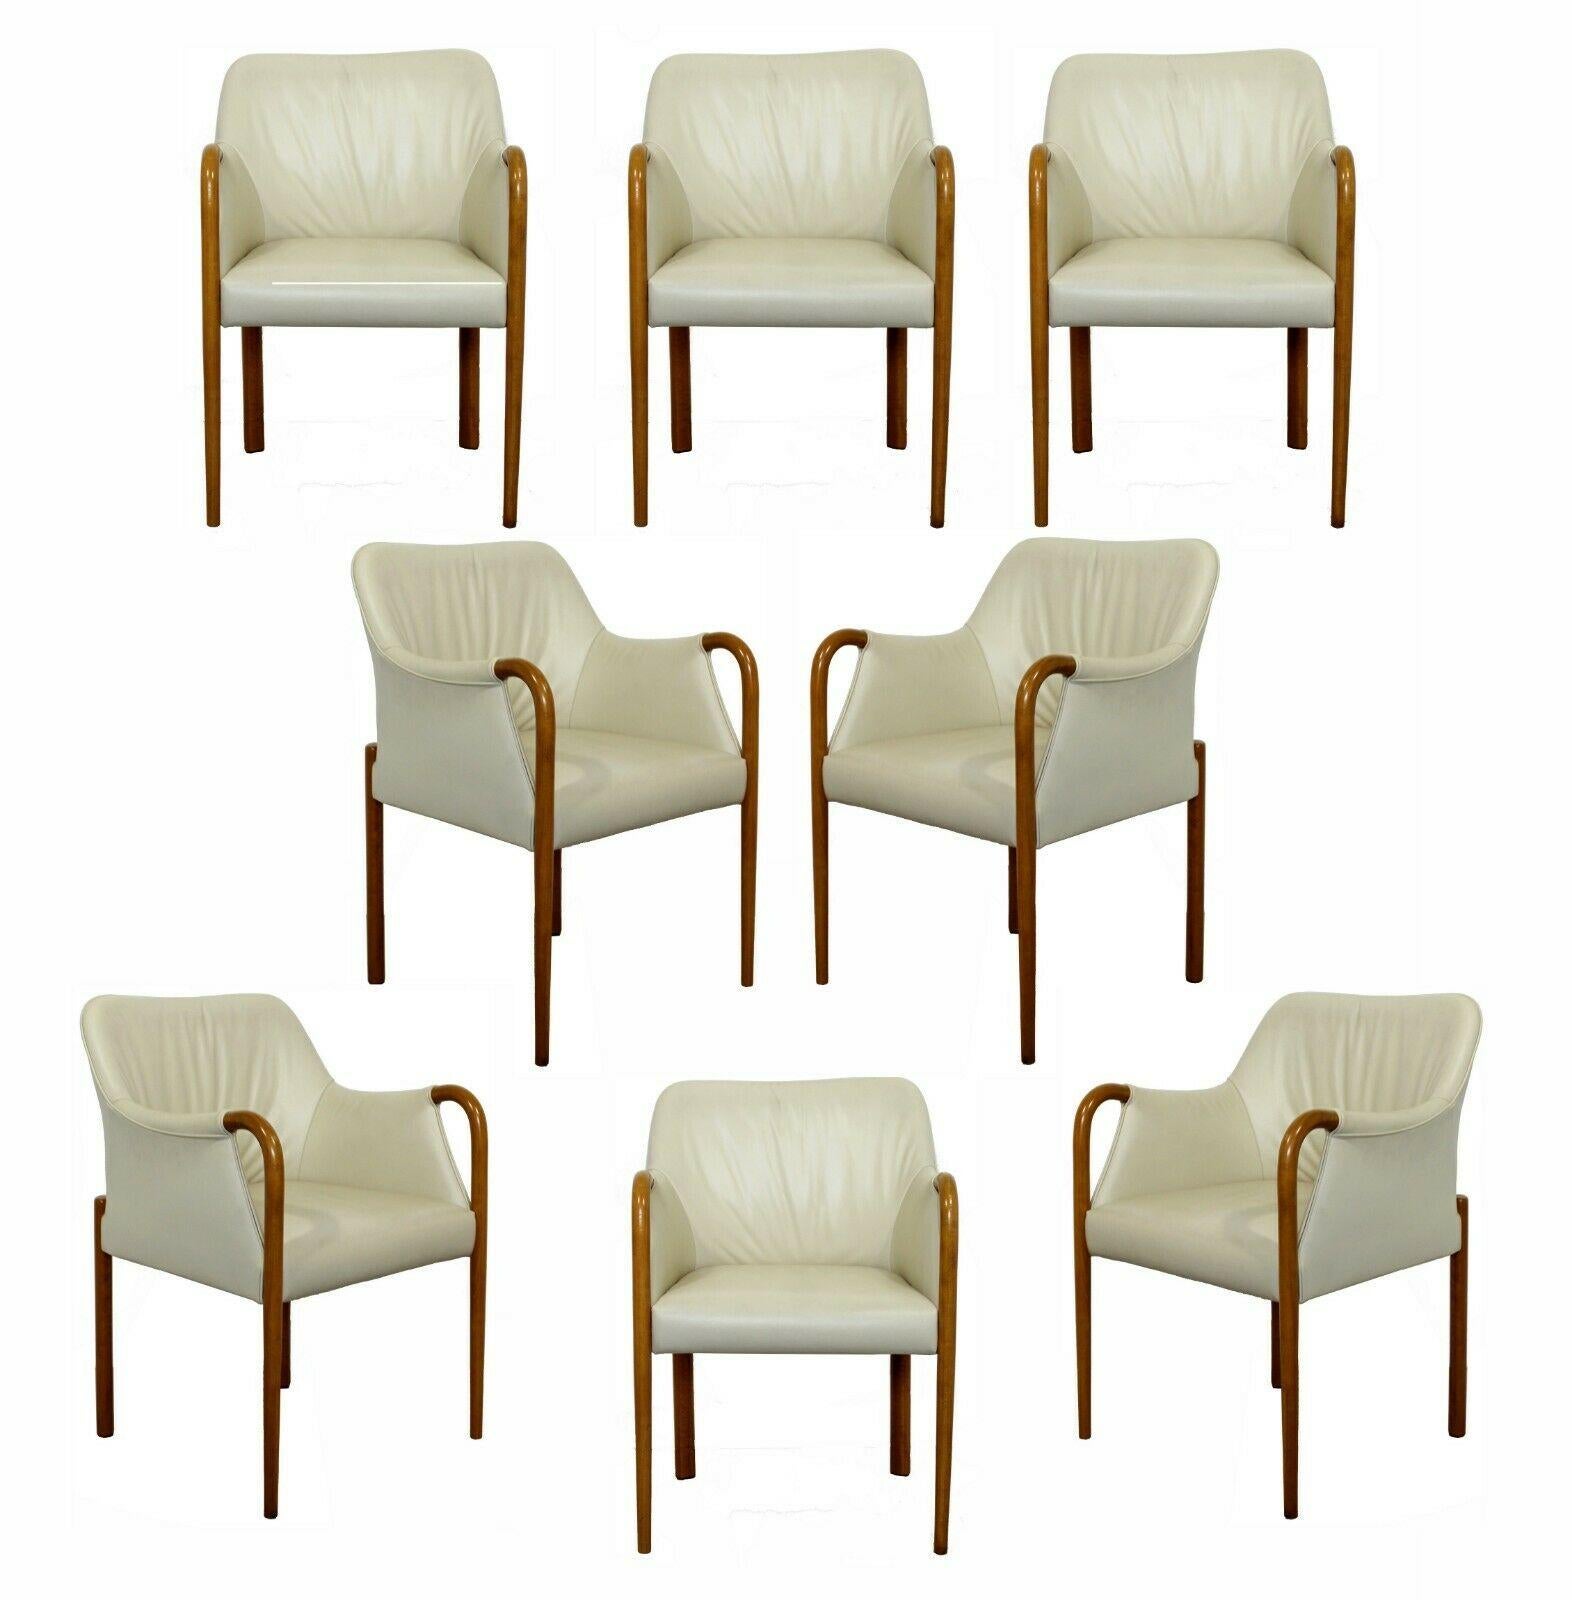 For your consideration is a brilliant set of eight, beige leather and blonde wood, 